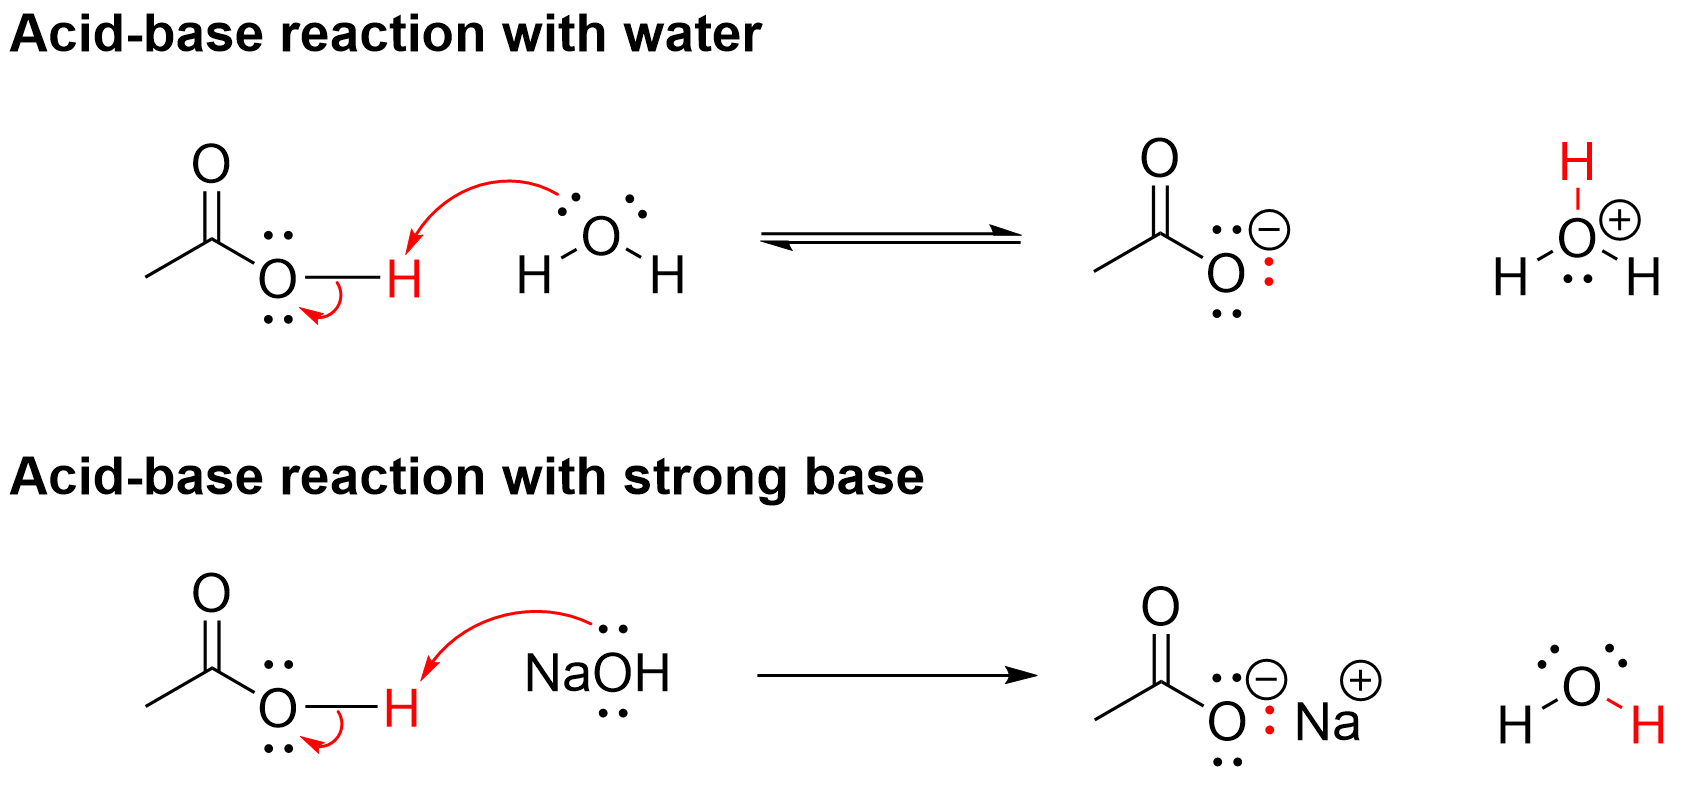 A carboxylic acid (CA) may act as the acid/proton source in a reaction where compounds like water or base deprotonate the CA, producing a carboxylate. The reaction involves the O of water or a base like NaOH having an arrow tail from one of its lone pairs approach the arrowhead towards the H in the OH group of the CA, thus pushing the O-H bond electron density onto the O of the CA group, leaving it with a negative charge.